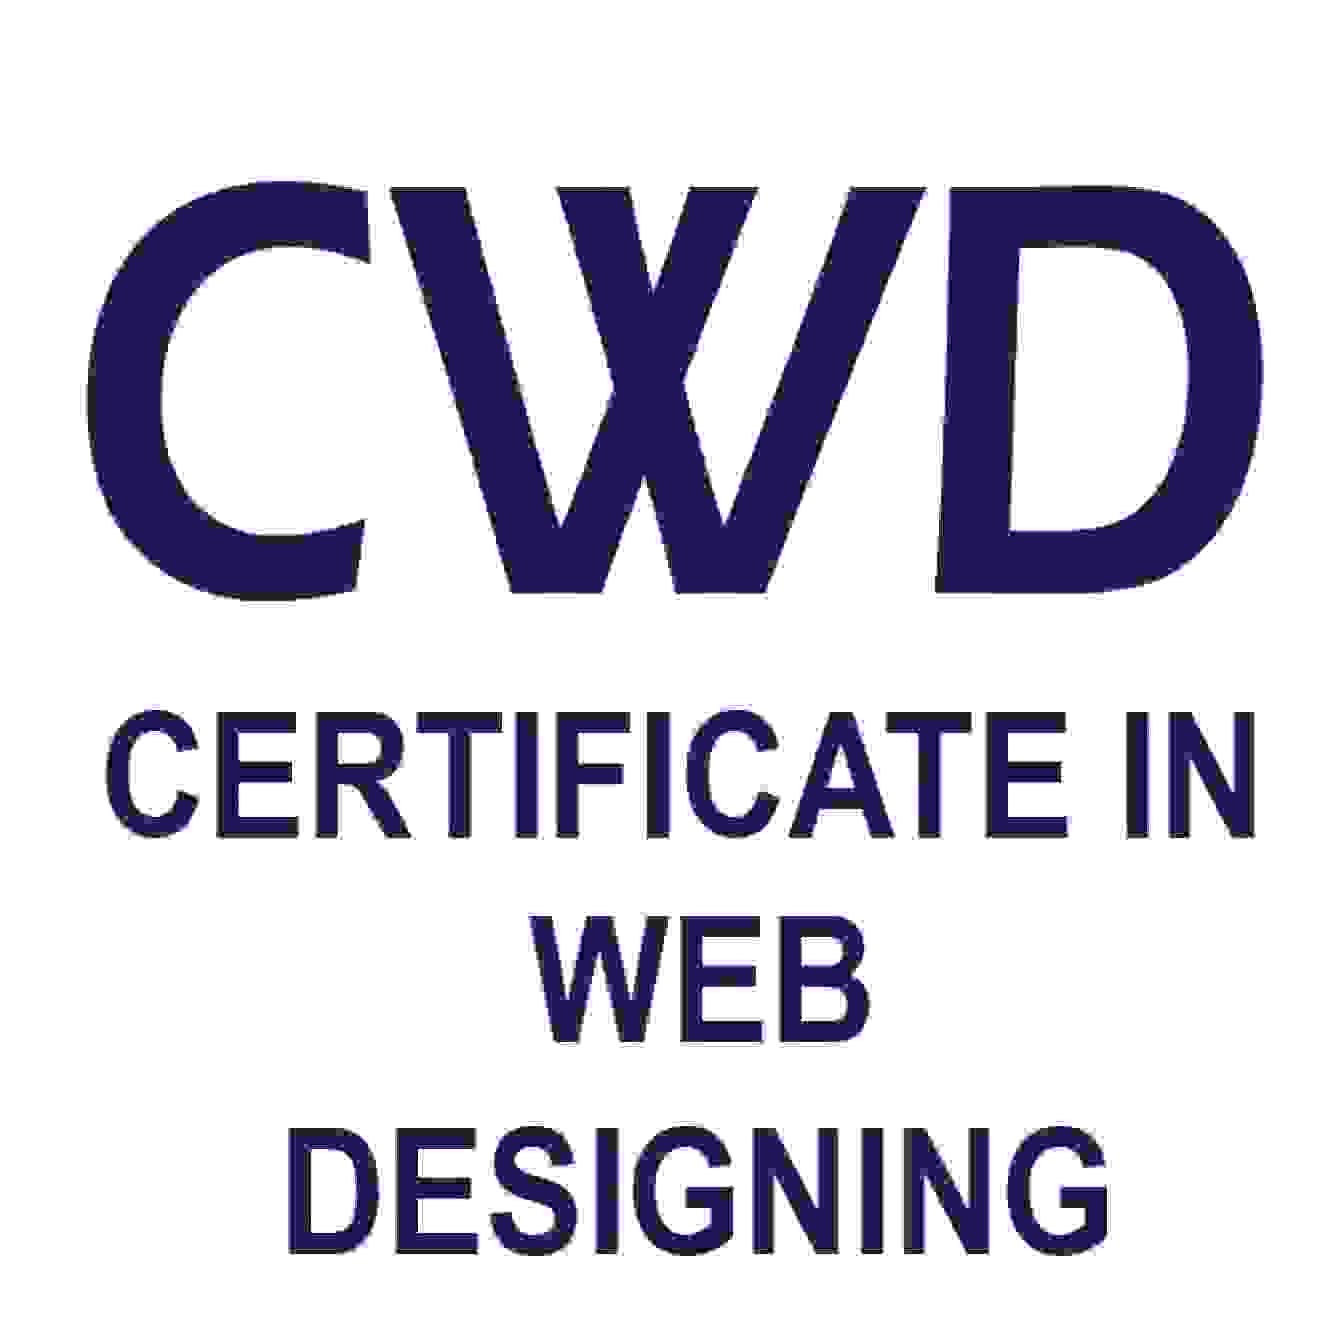 CWD (Certification In Web Designing)